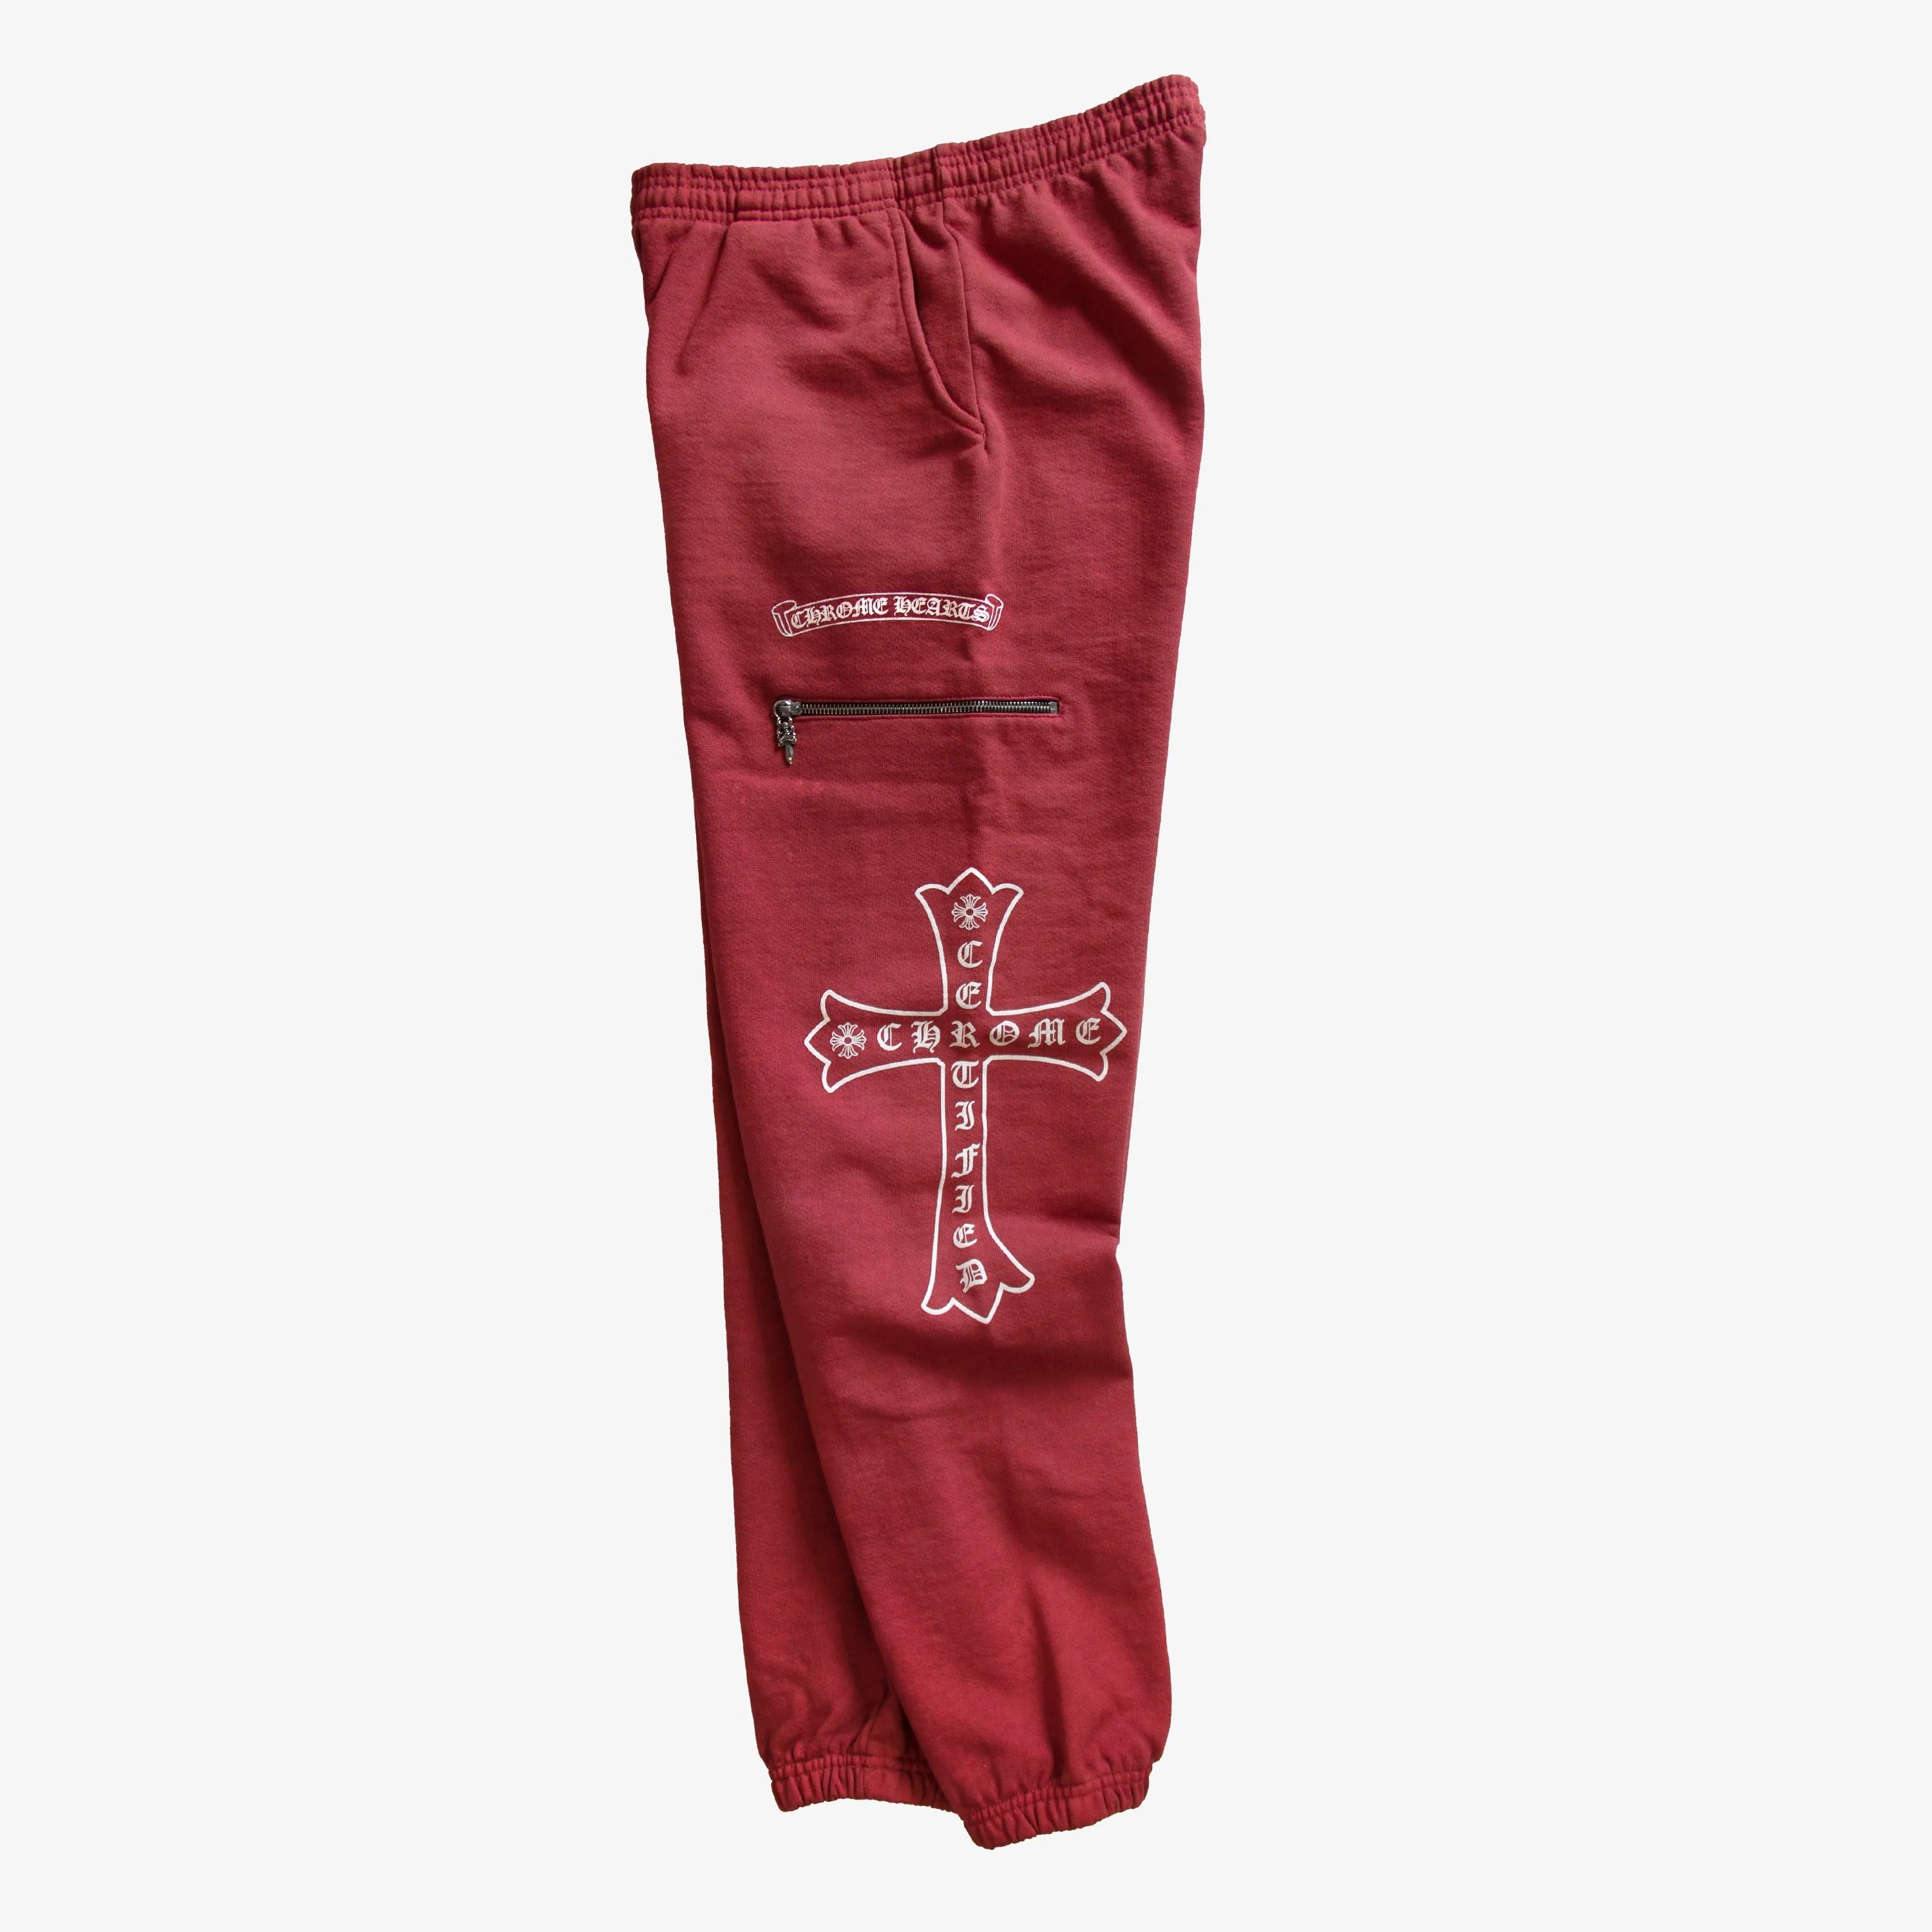 RED DRAKE CLB FRIENDS AND FAMILY SWEATPANT